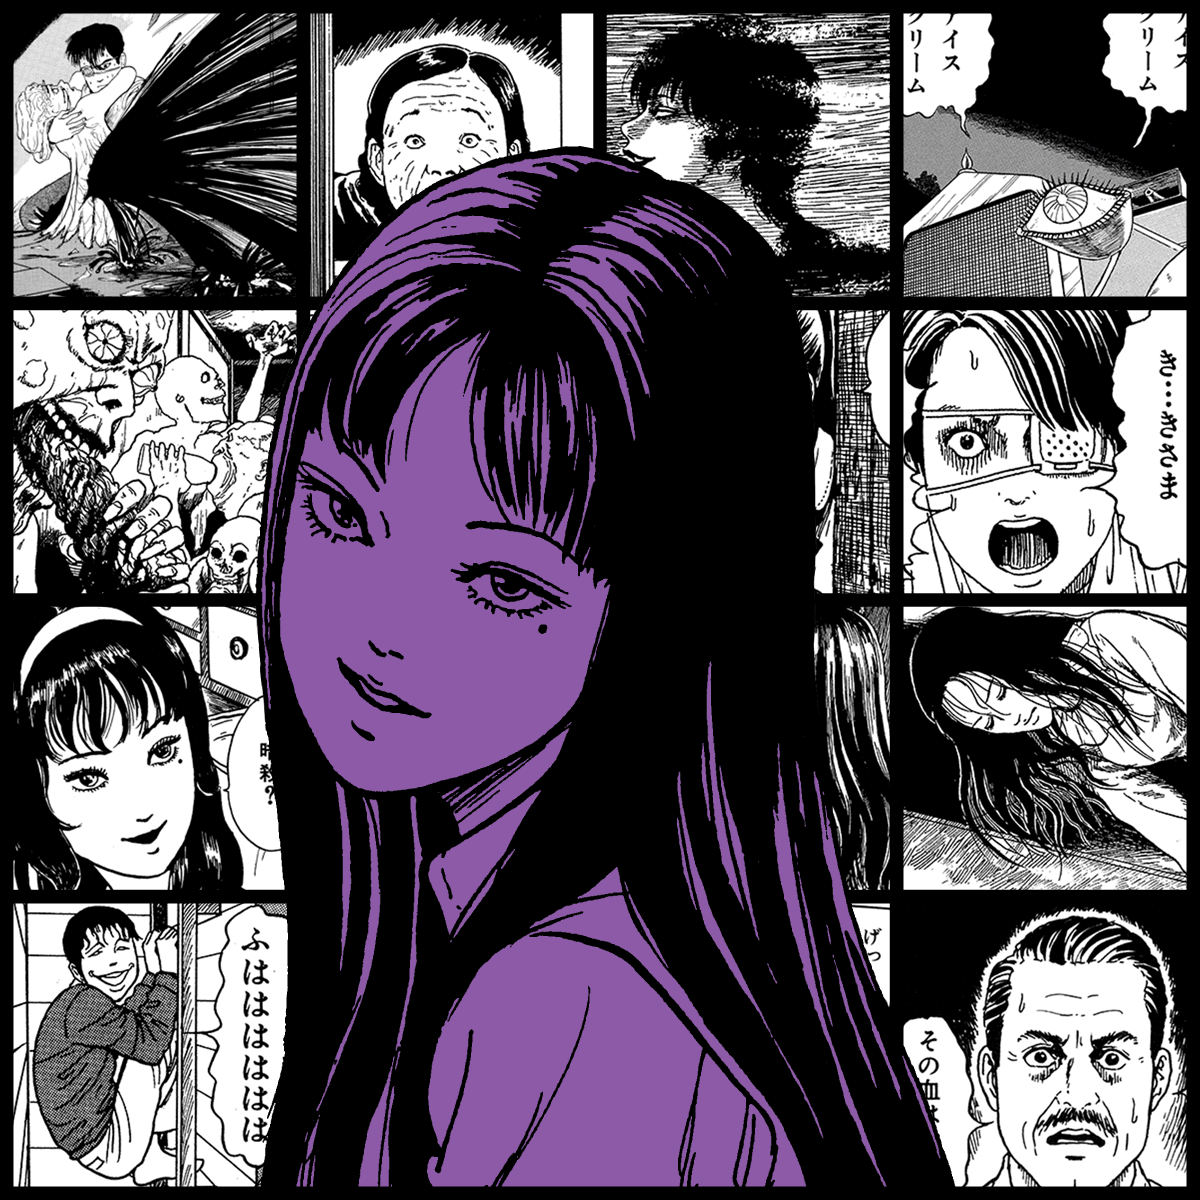 TOMIE by Junji Ito #1641